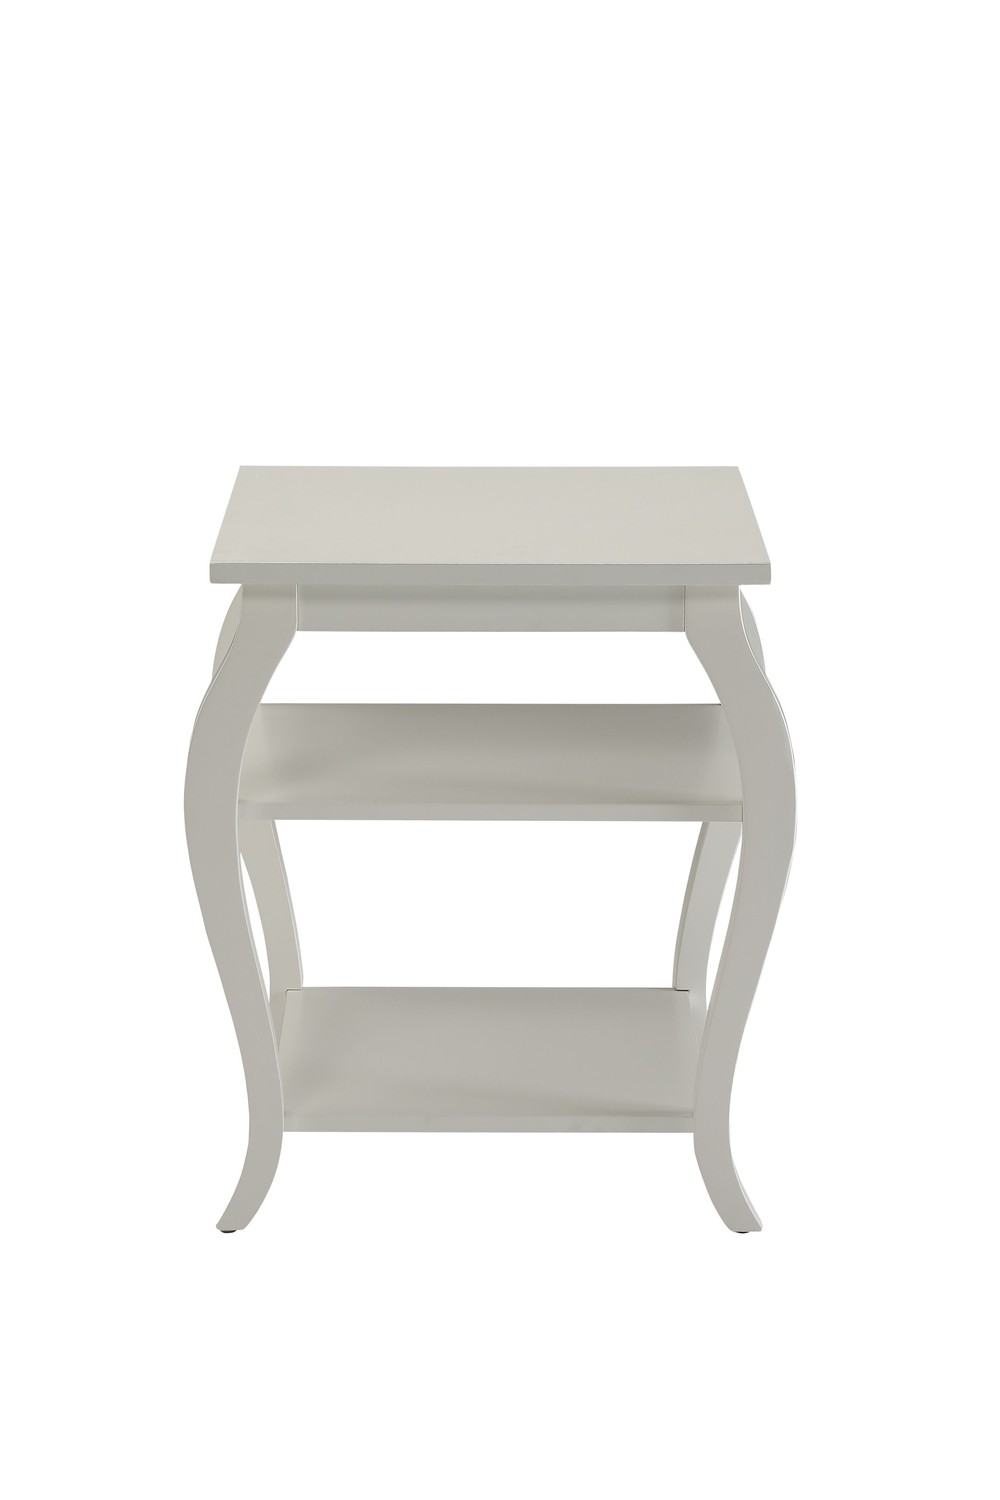 20" X 18" X 23" White Solid Wood Leg End Table